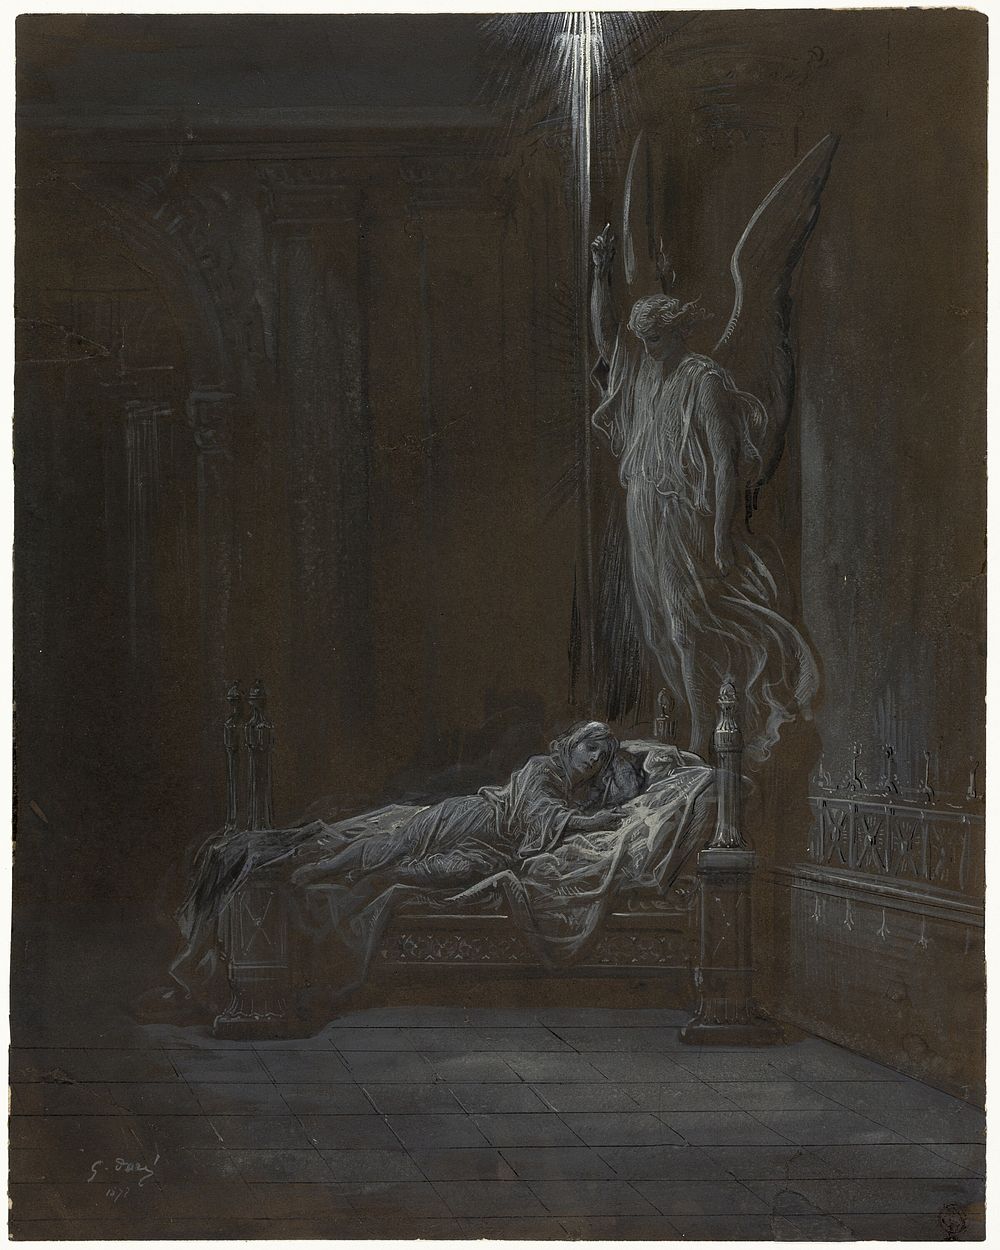 The Calling of Samuel by Gustave Doré